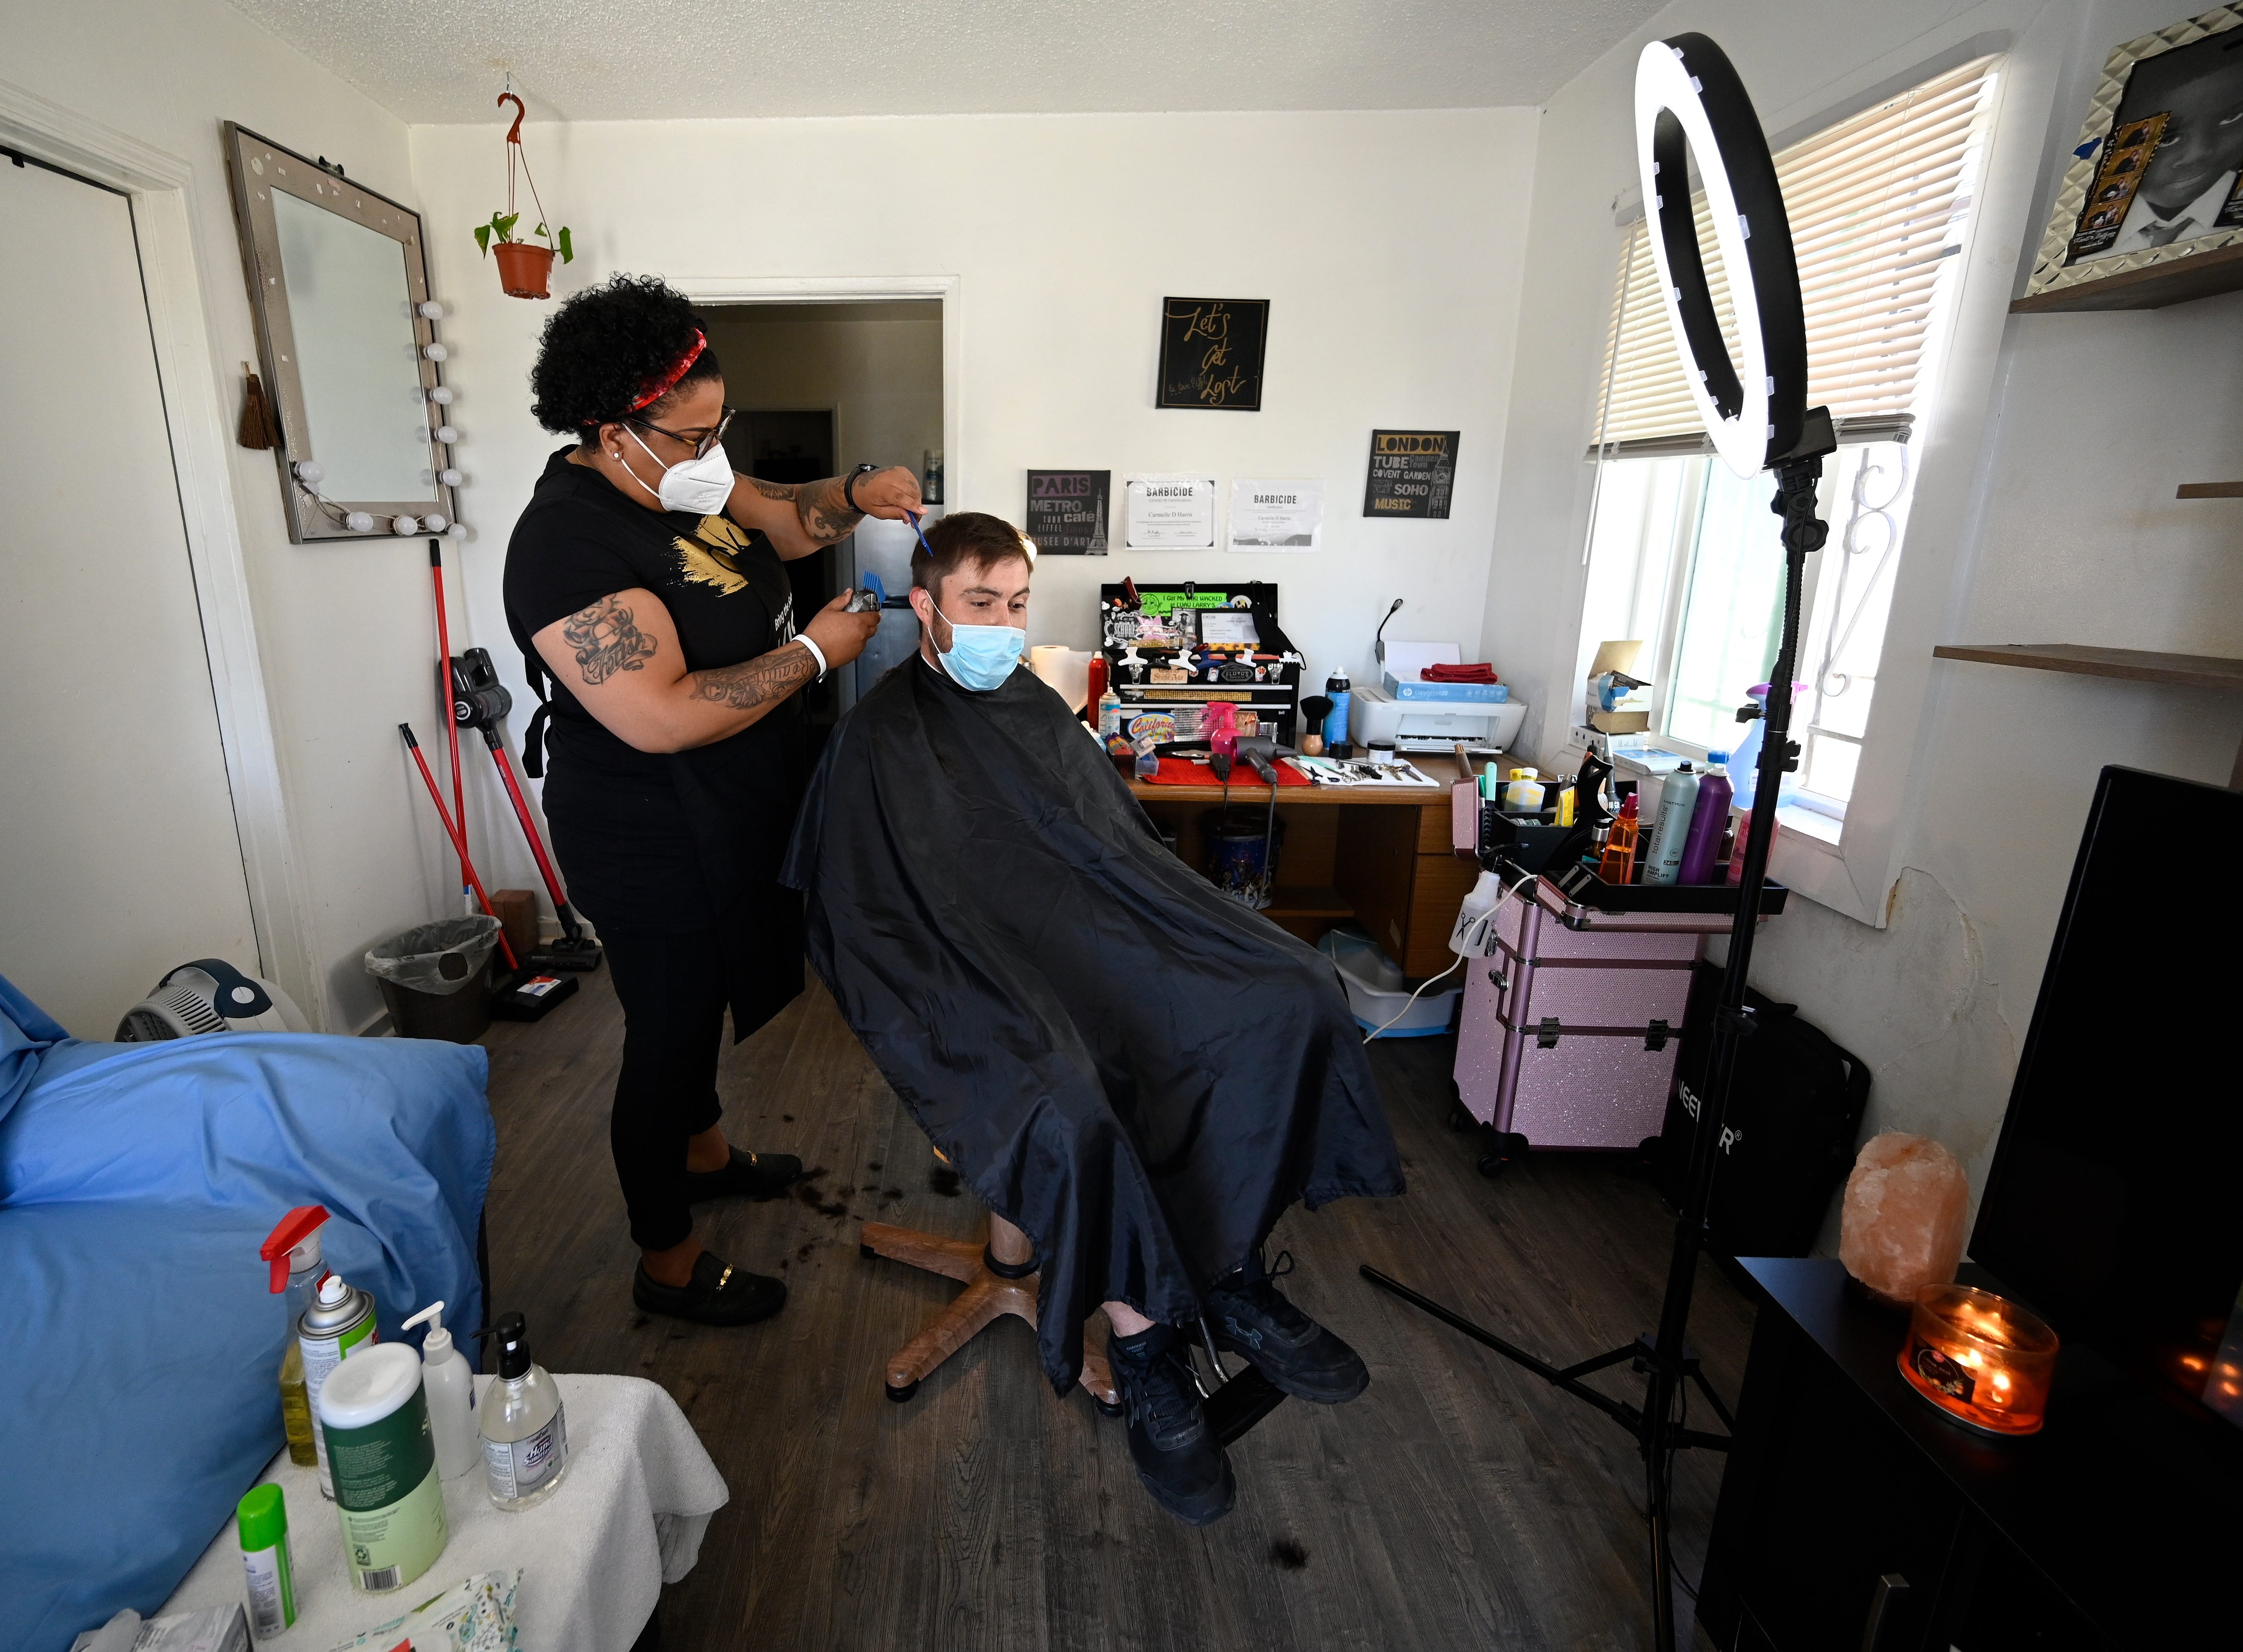 Coronavirus Barbers And Hair Stylists Defy Stay At Home Orders